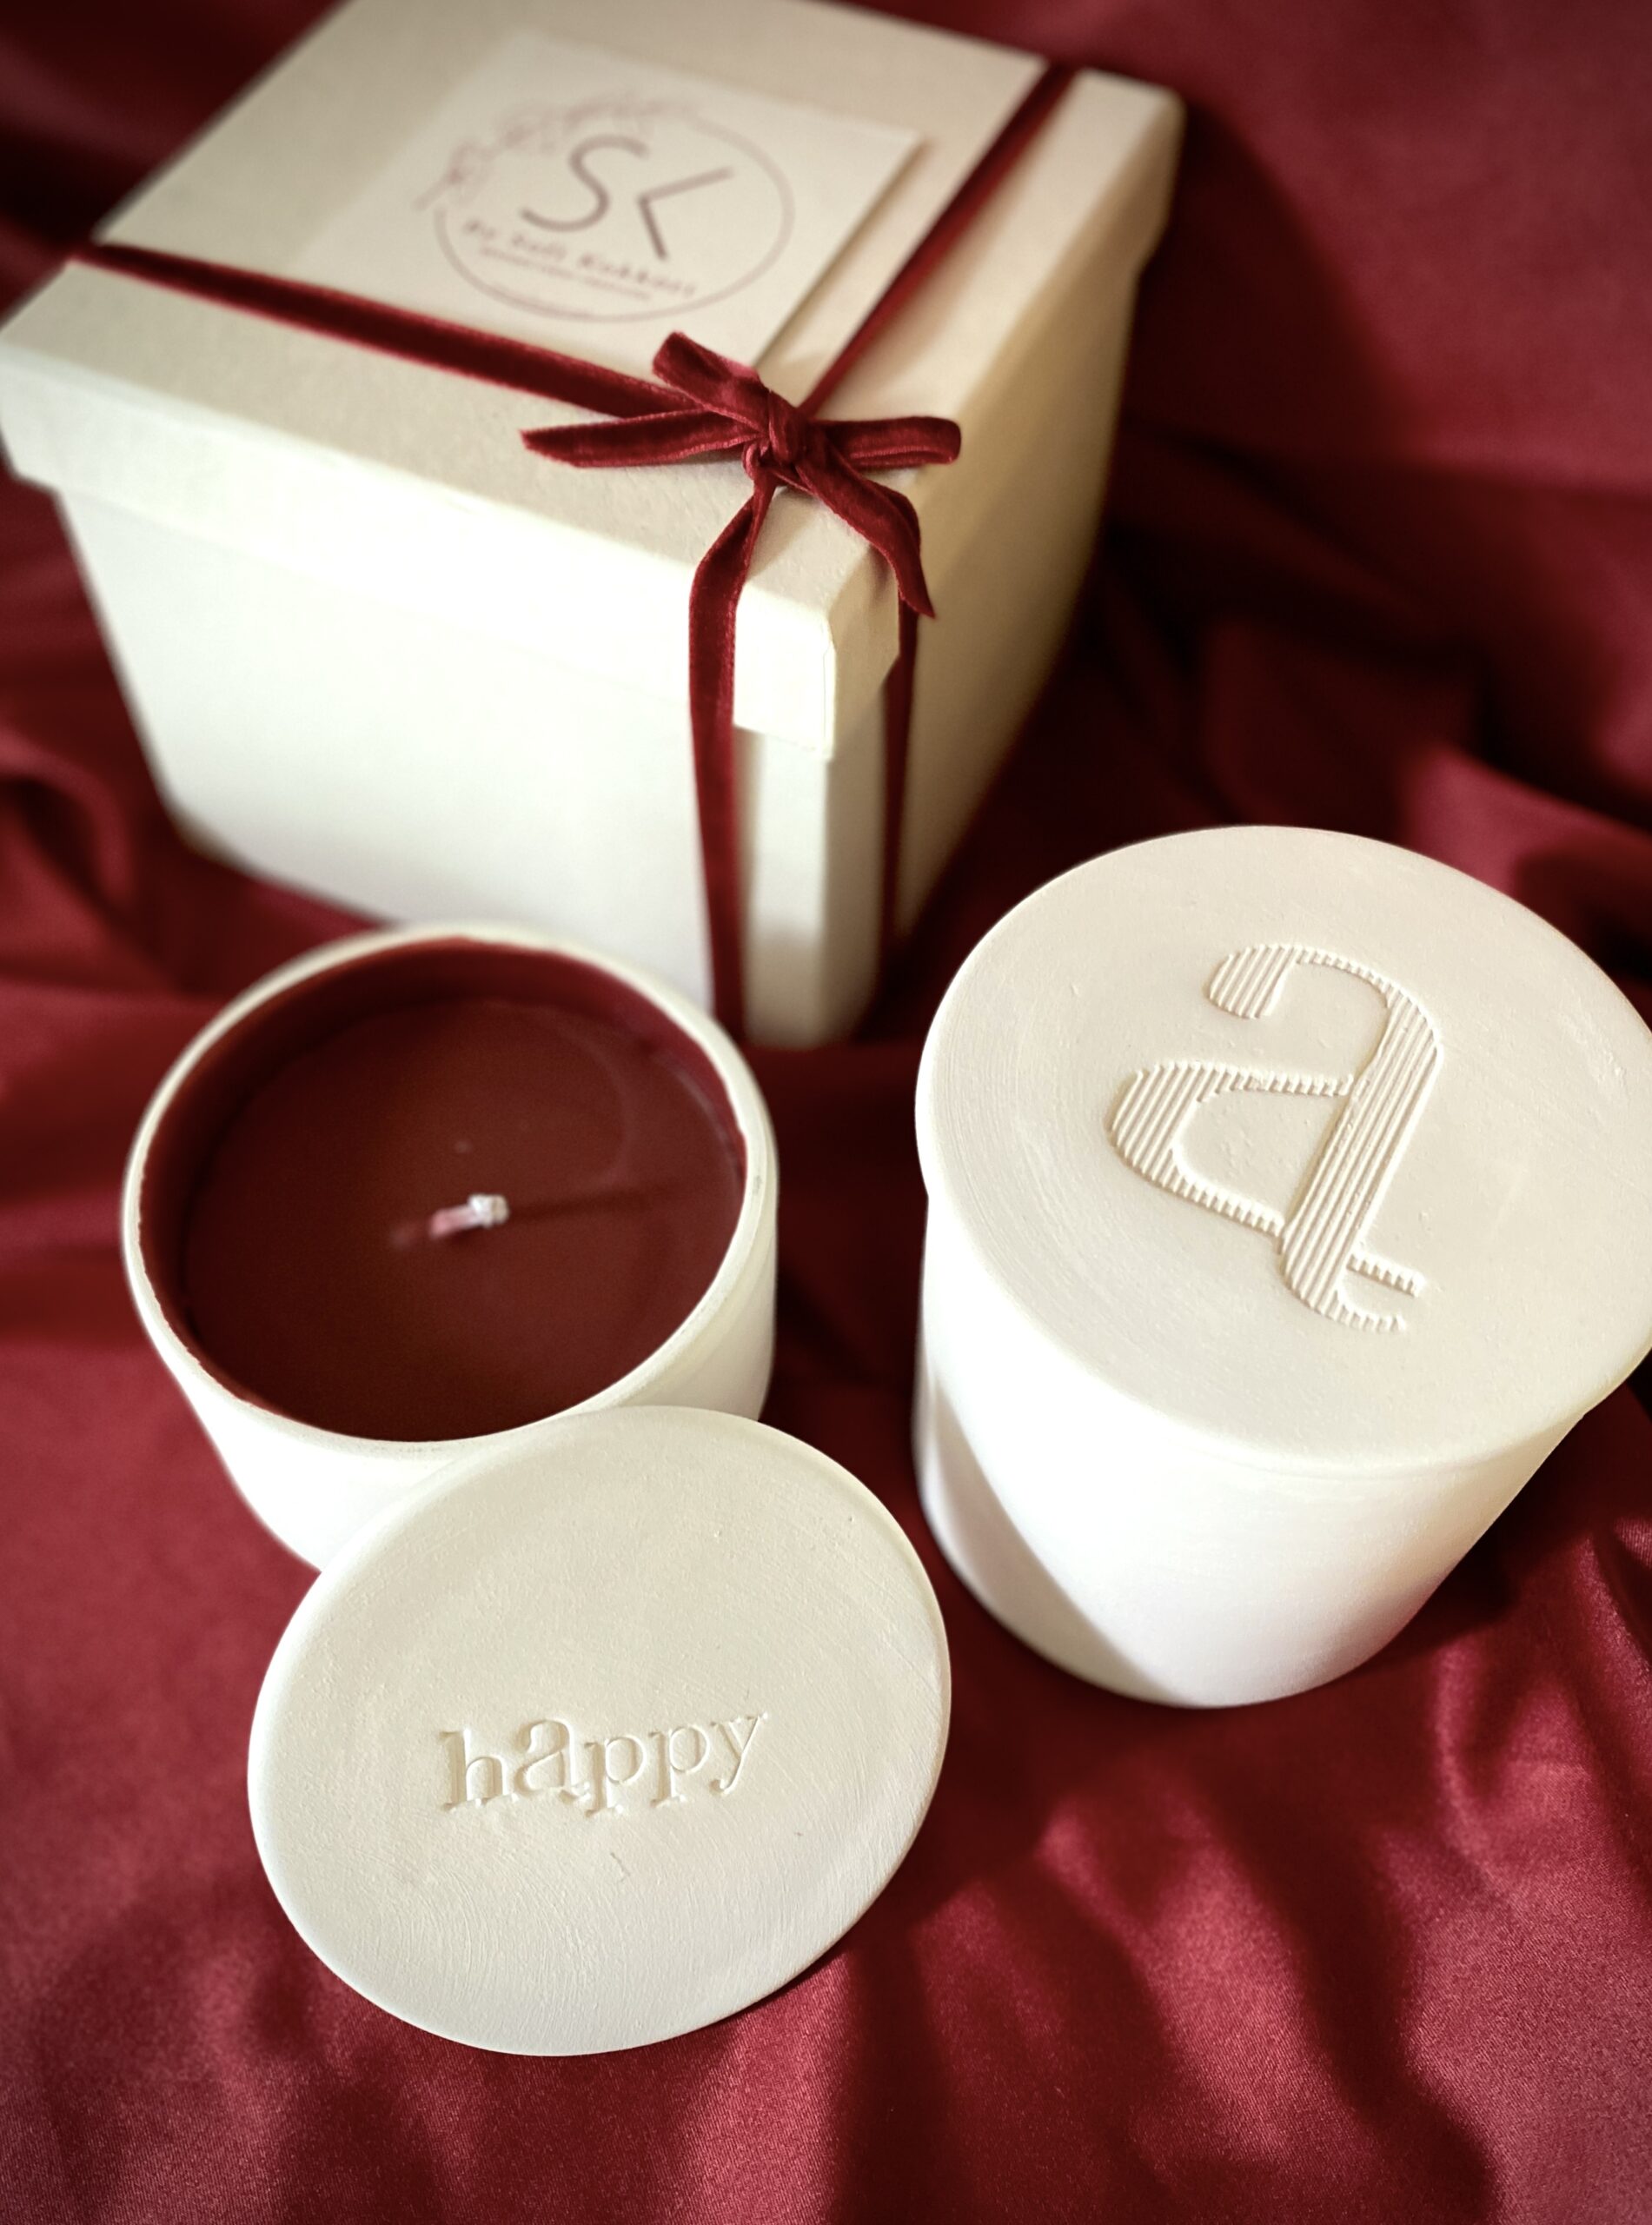 happy-24-special-occasion-handmade-white-ceramic-soy-blend-burgundi-candle-pumpkin-spice-big-with-lid-packaging